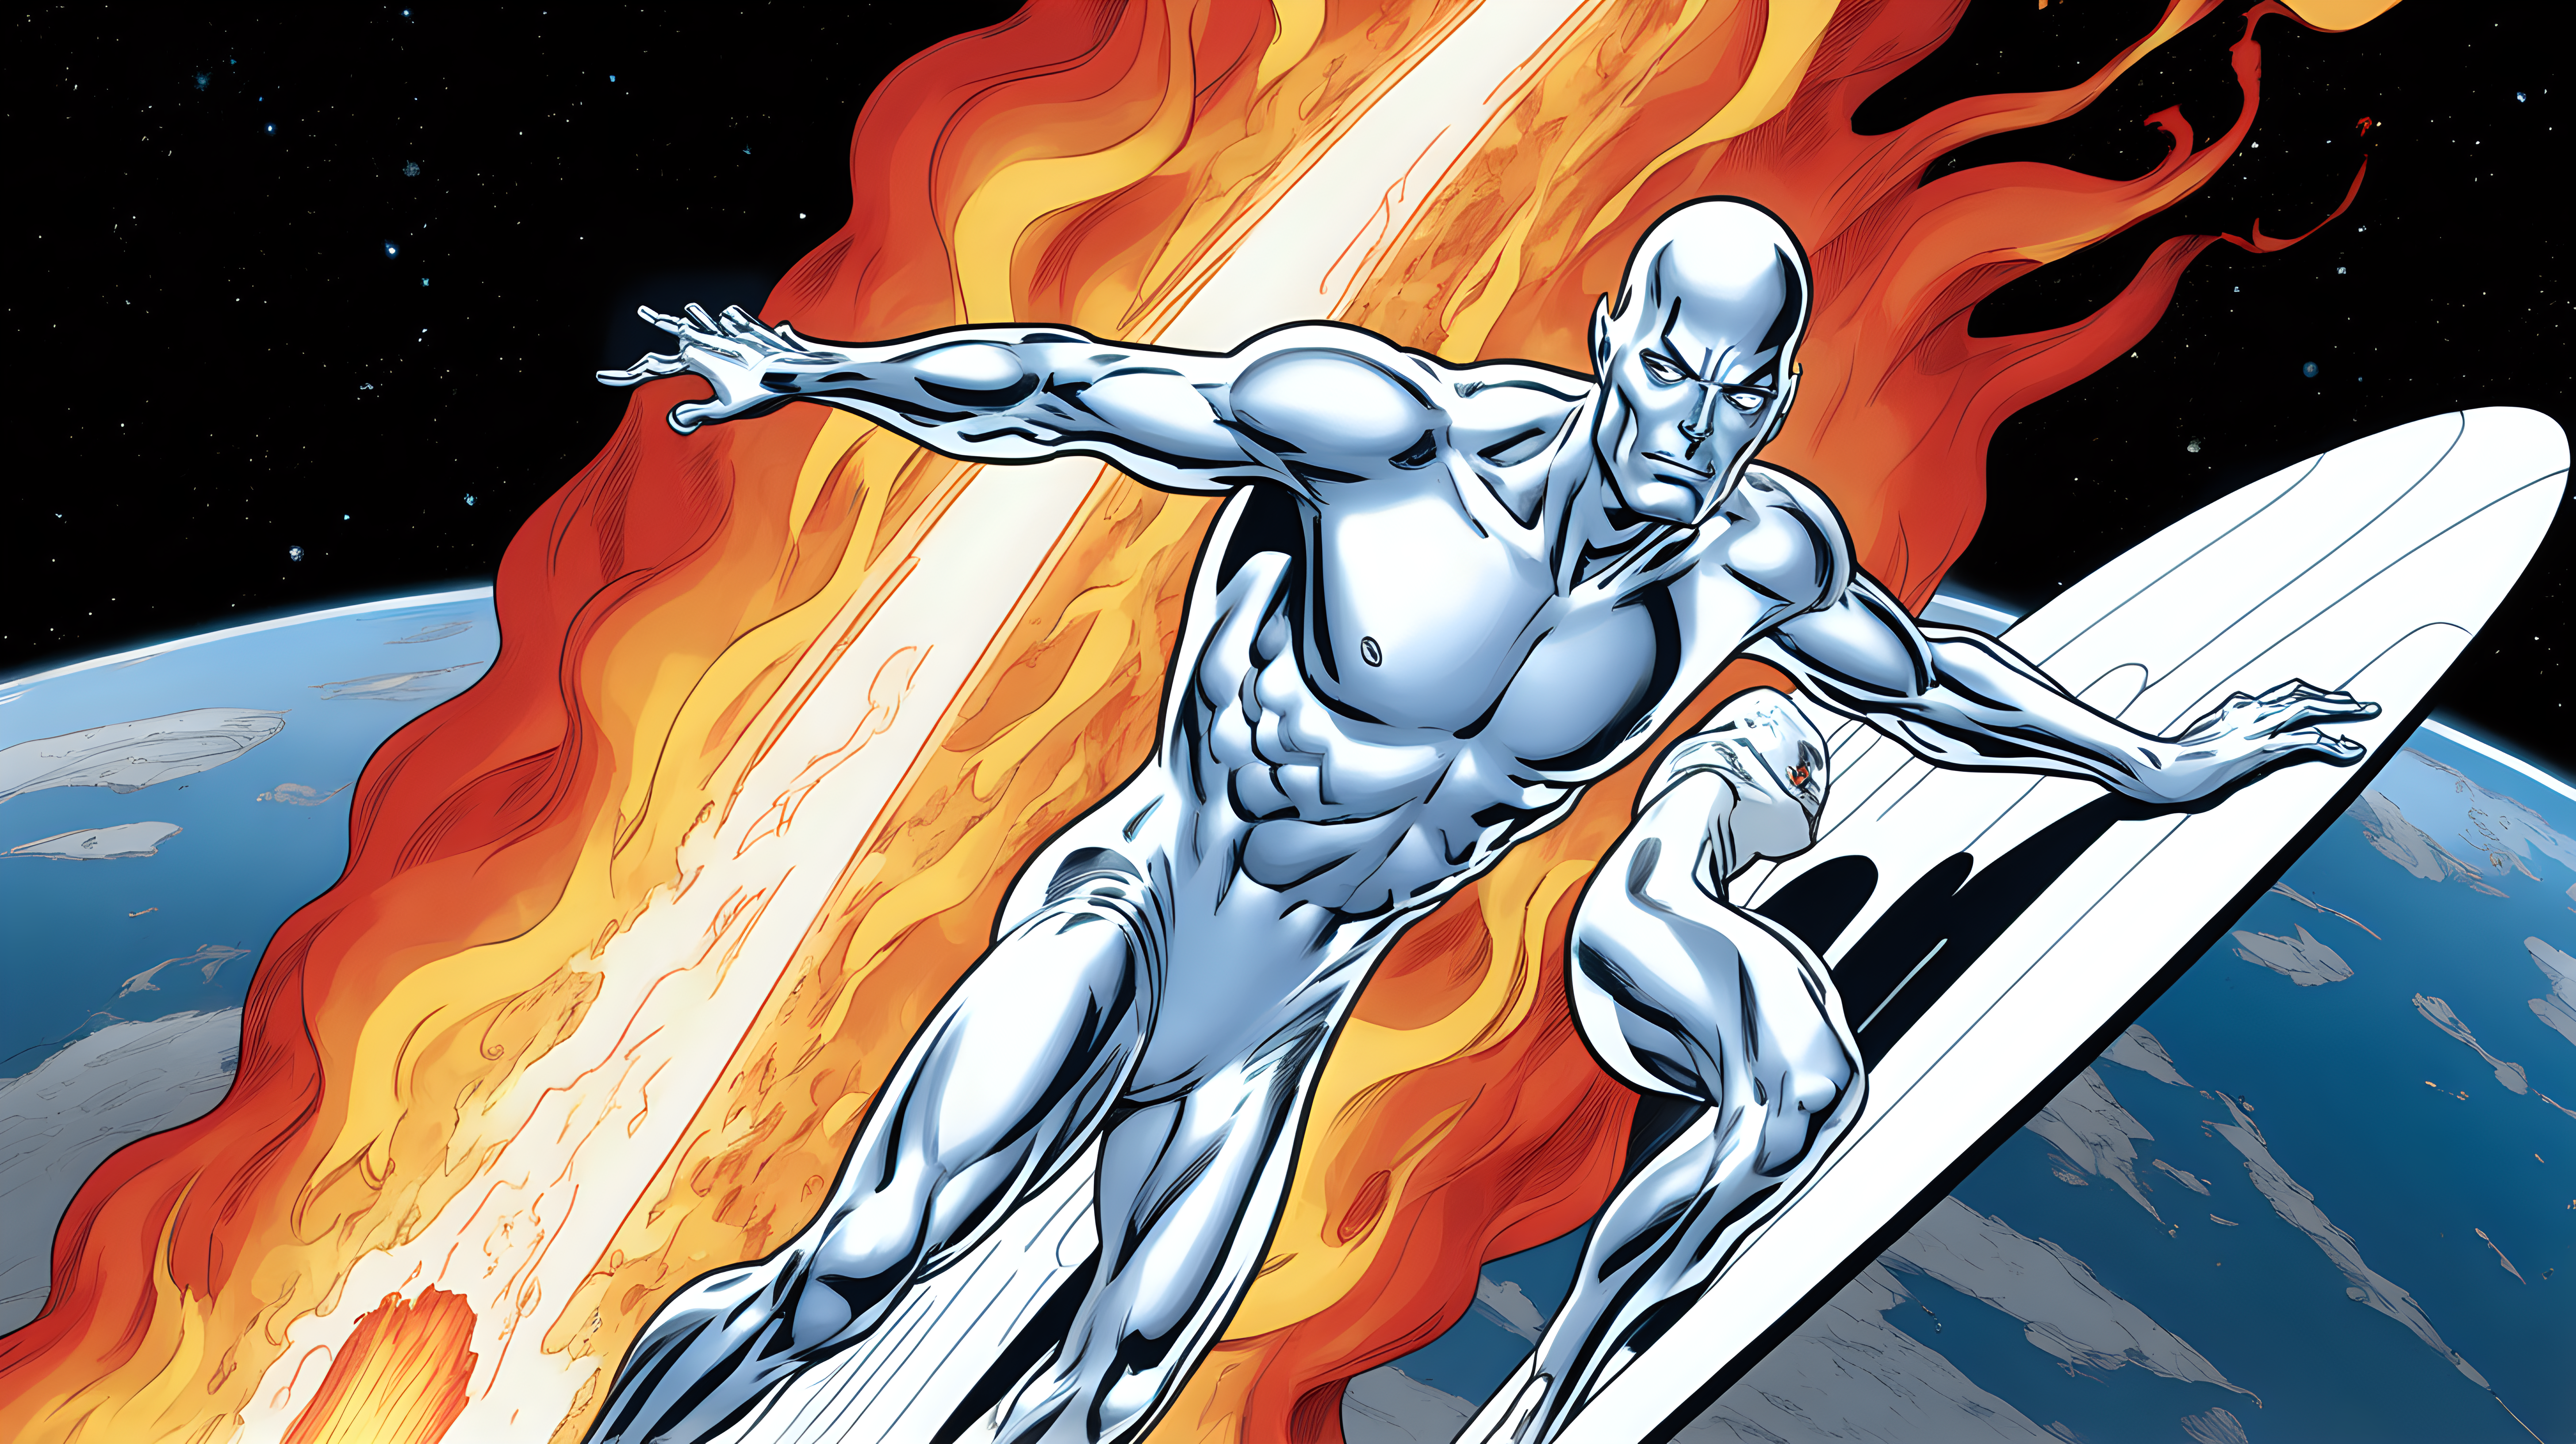 The Silver Surfer reigning fire down on  earth from space